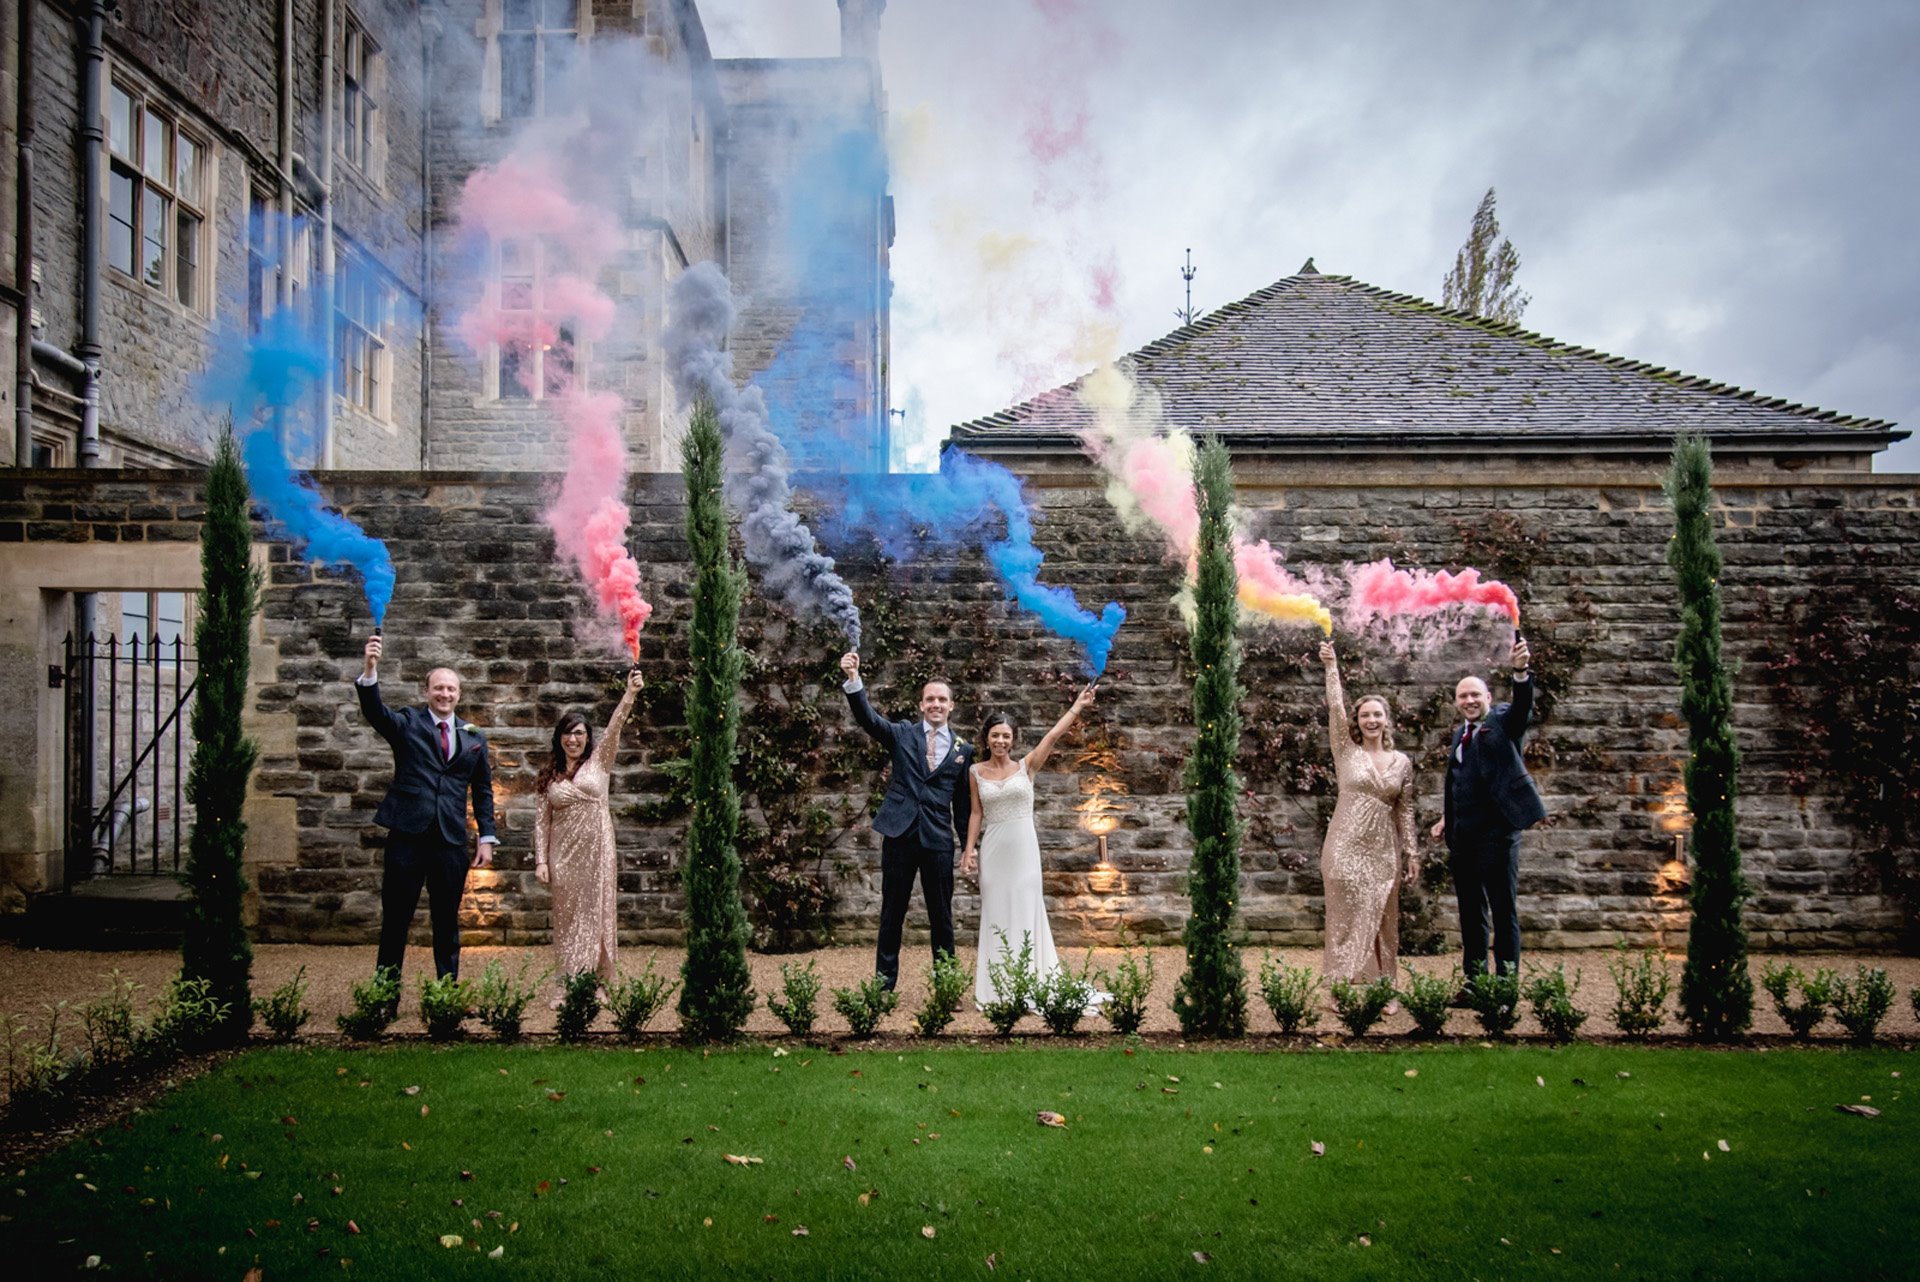 Micro wedding party have fun with smoke bombs outside covid safe wedding venue elmore court October 2020